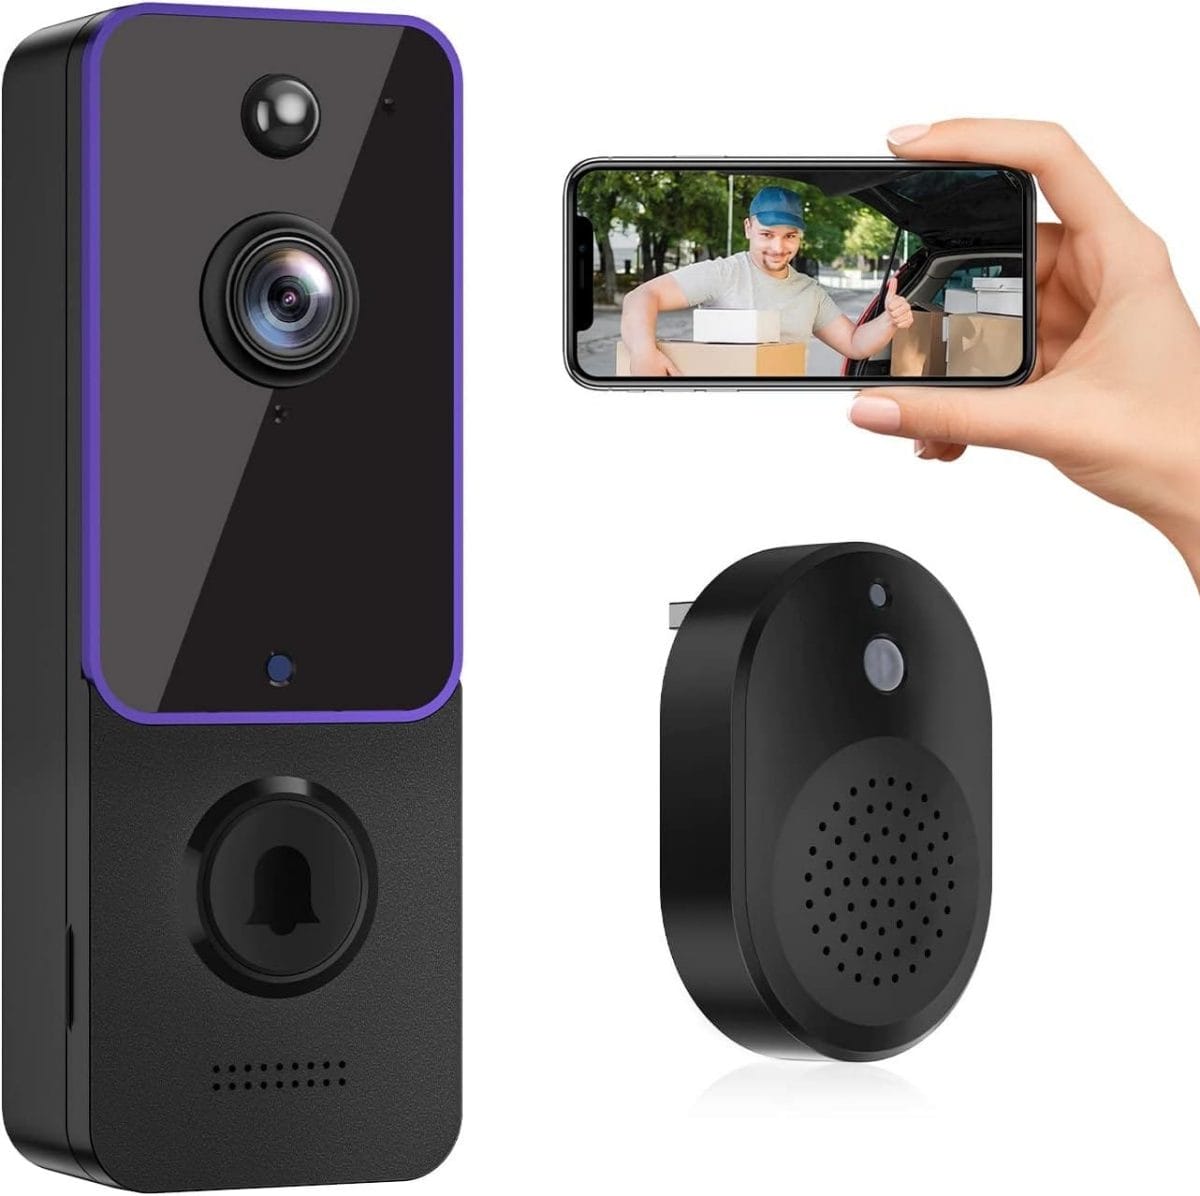 Tuck SHARKPOP Doorbell Camera Wireless, WiFi Video Doorbell, Free Ring Chime Included, Indoor/Outdoor Surveillance with Smart Human Detection, 2-Way Audio, Night Vision, Cloud Storage, Live View